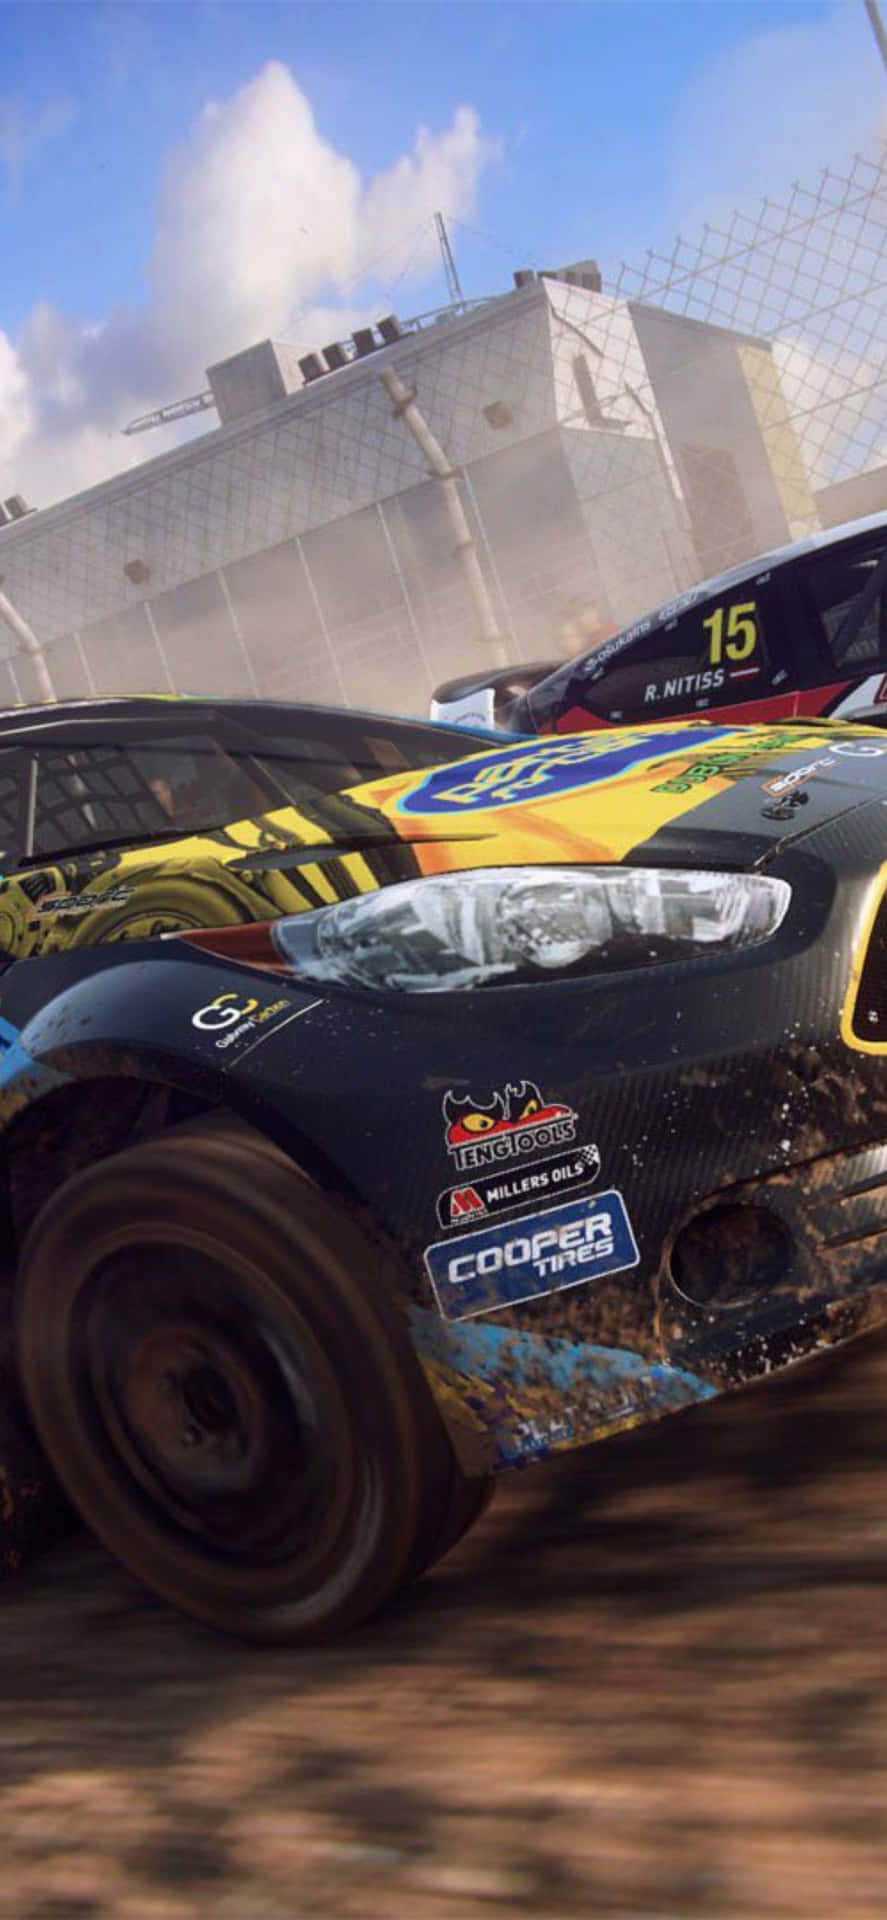 Race your way to a win with Dirt Rally on the Iphone Xs